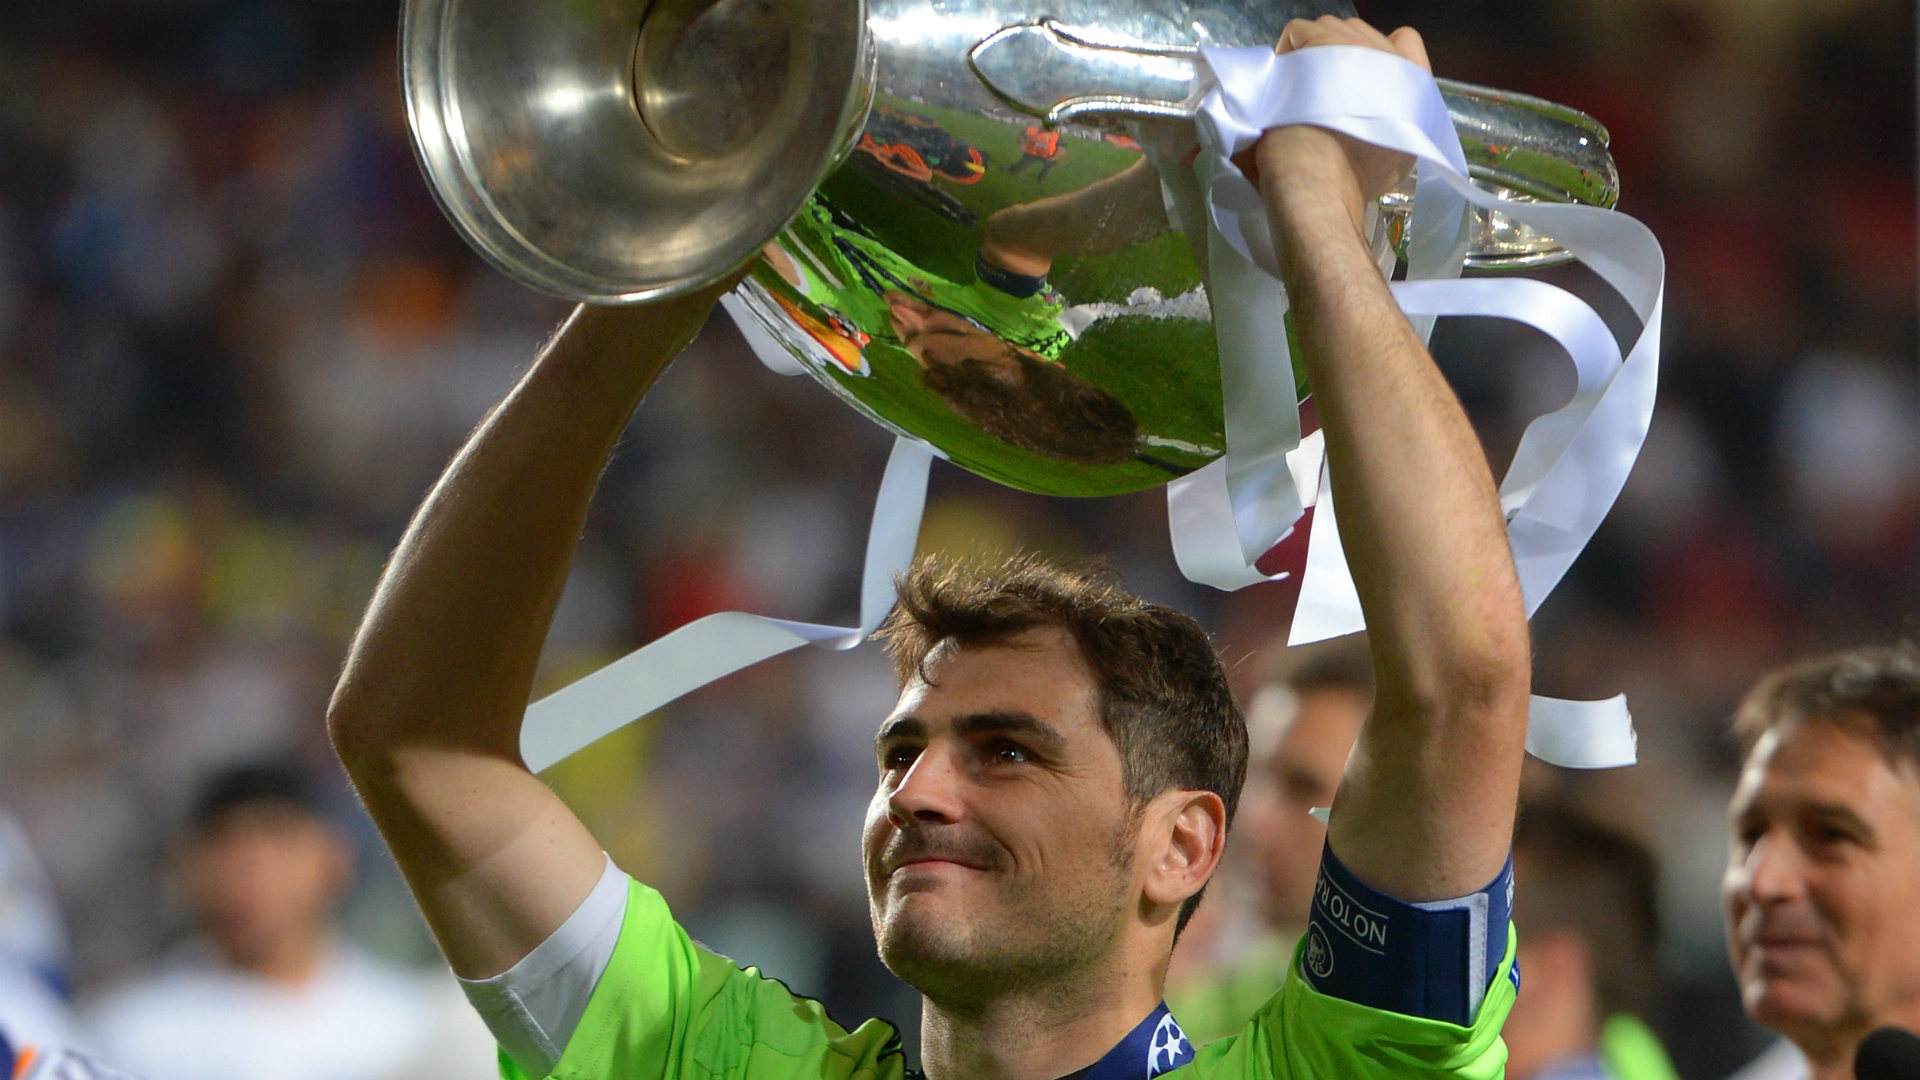 Following a heart attack in May last year, Real Madrid and Spain great Iker Casillas has announced his retirement.